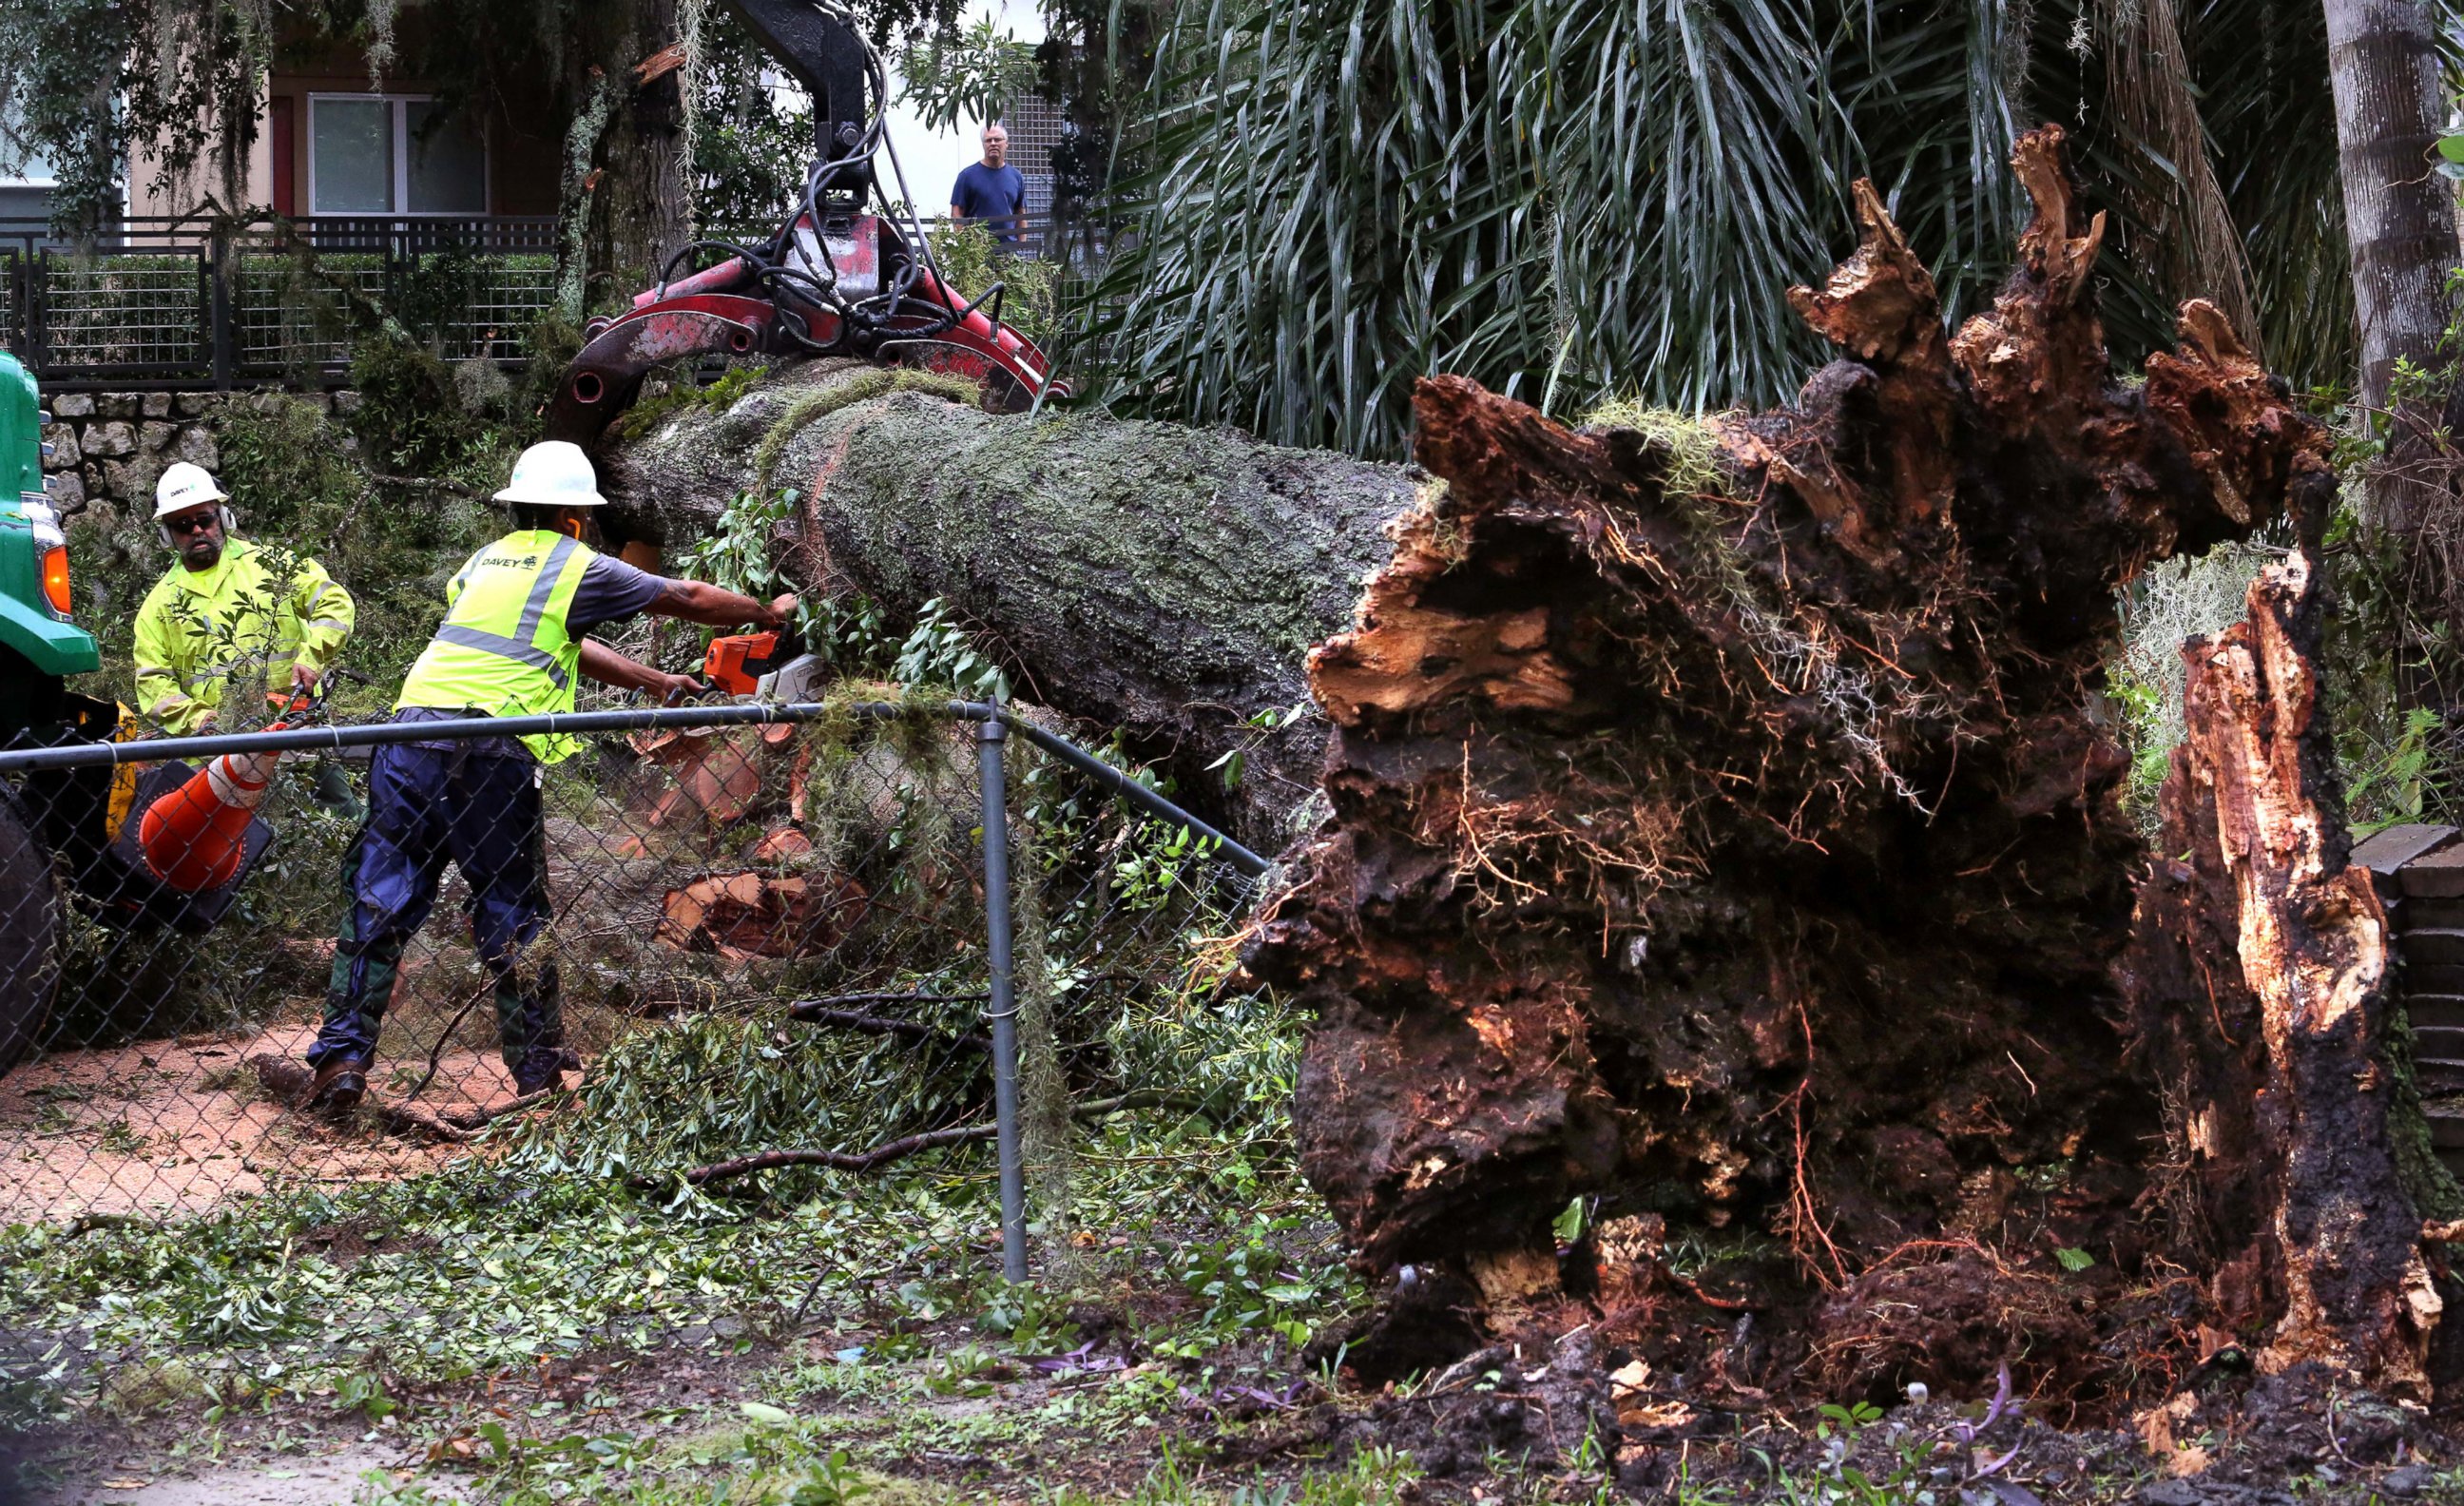 PHOTO: Workers from Davey Tree Service cut up a massive tree that closed Haven Drive in the Ivanhoe District of Orlando, Florida, after winds from Hurricane Matthew pass through, Oct. 7, 2016. 